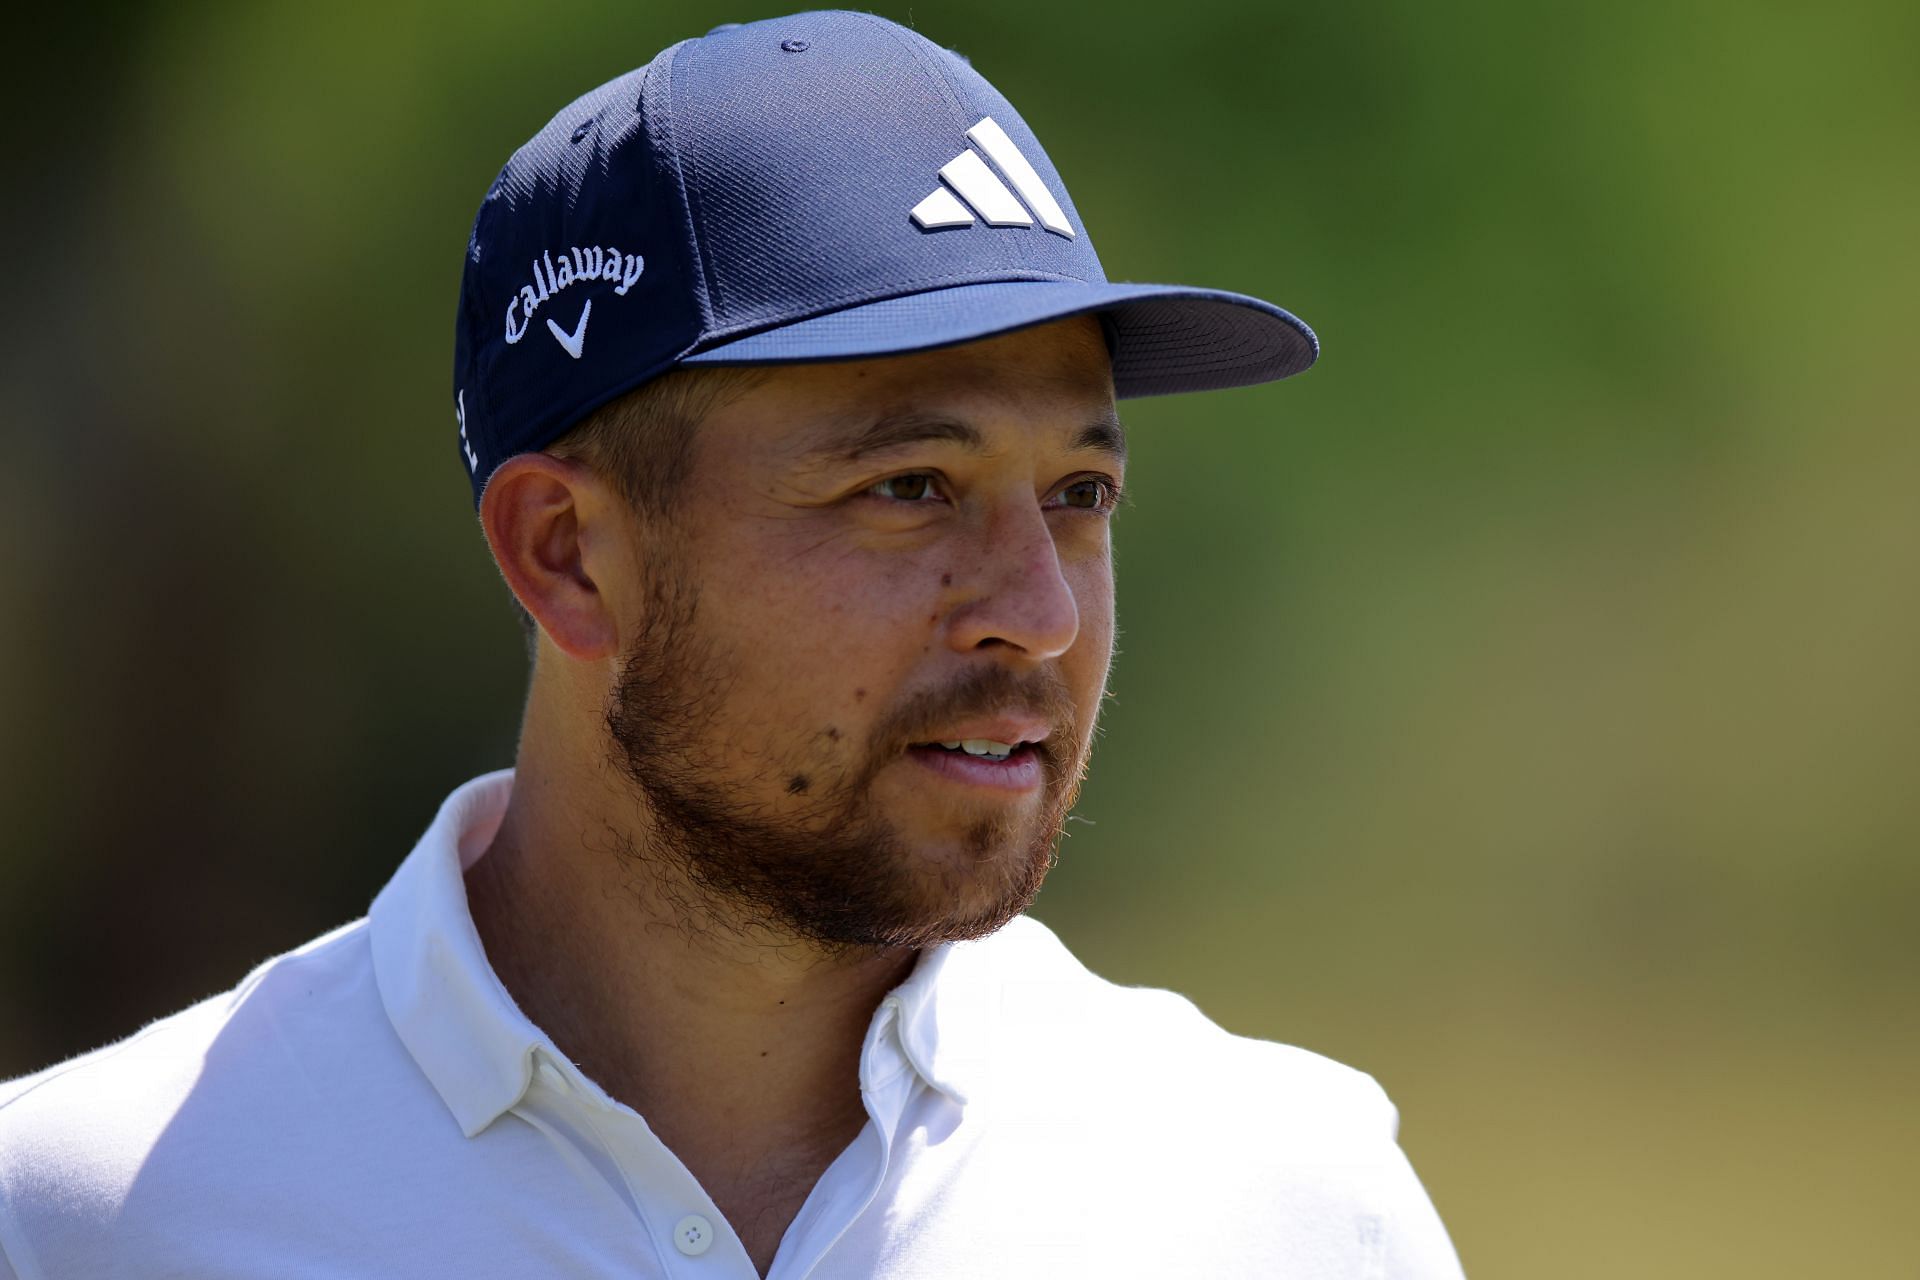 Xander Schauffele looks on during the Zurich Classic of New Orleans - Previews